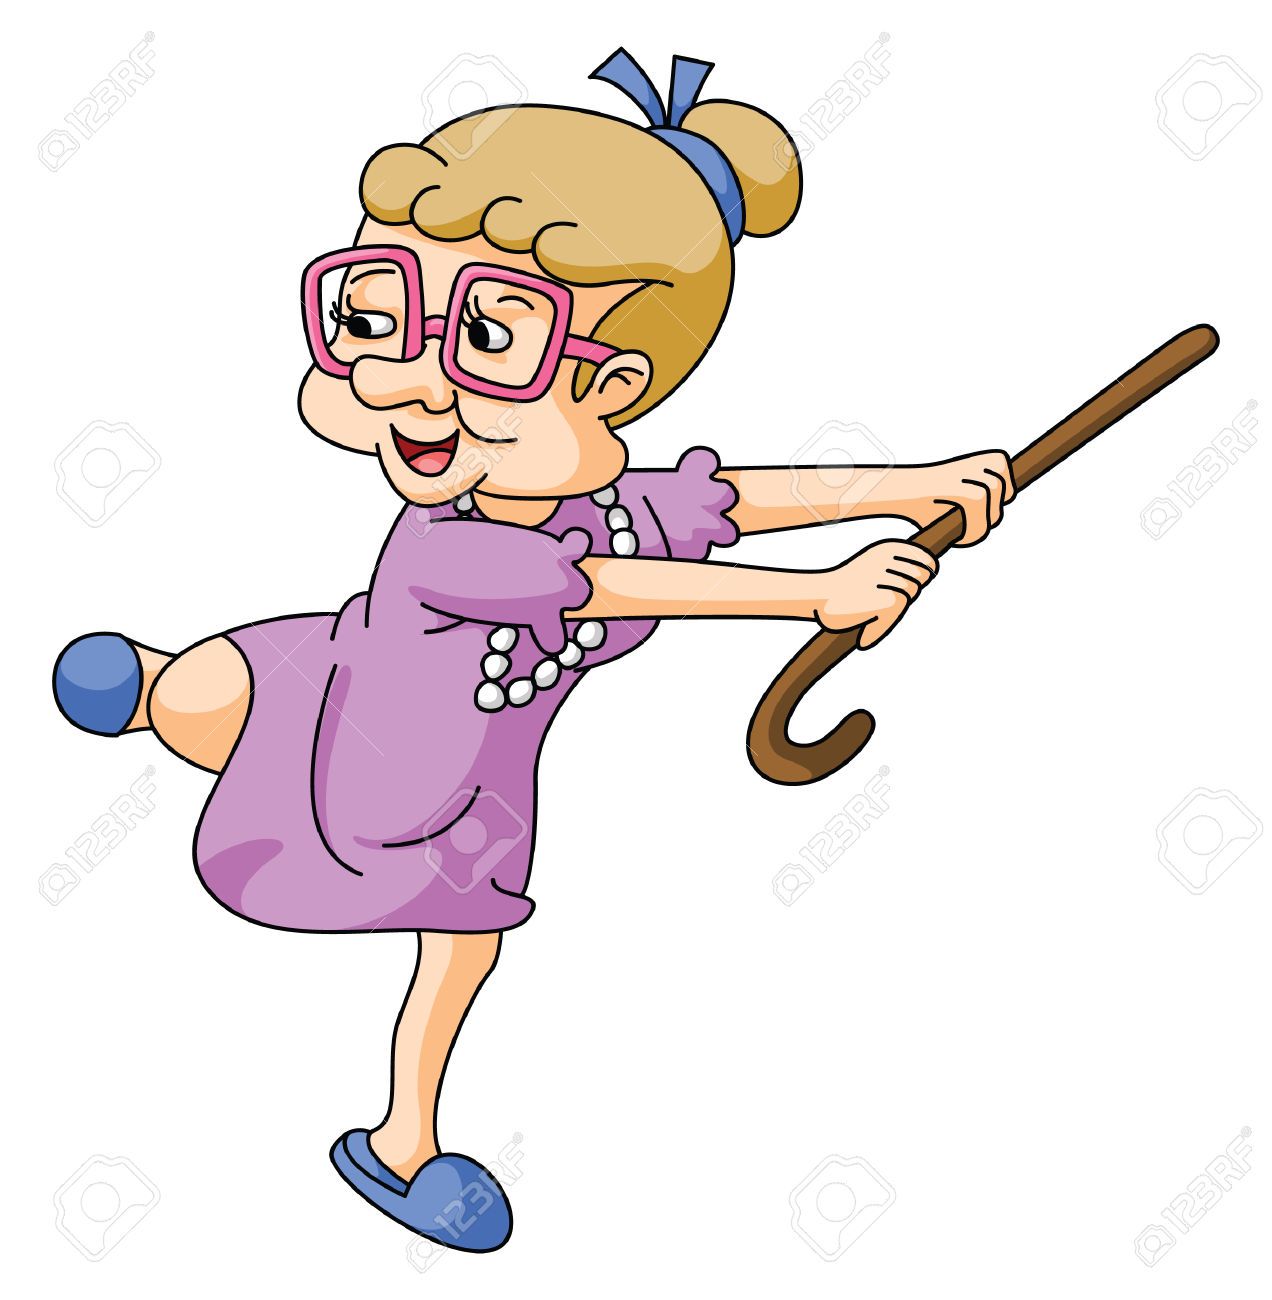 Grandmother clipart old lady. Woman stock illustrations cliparts